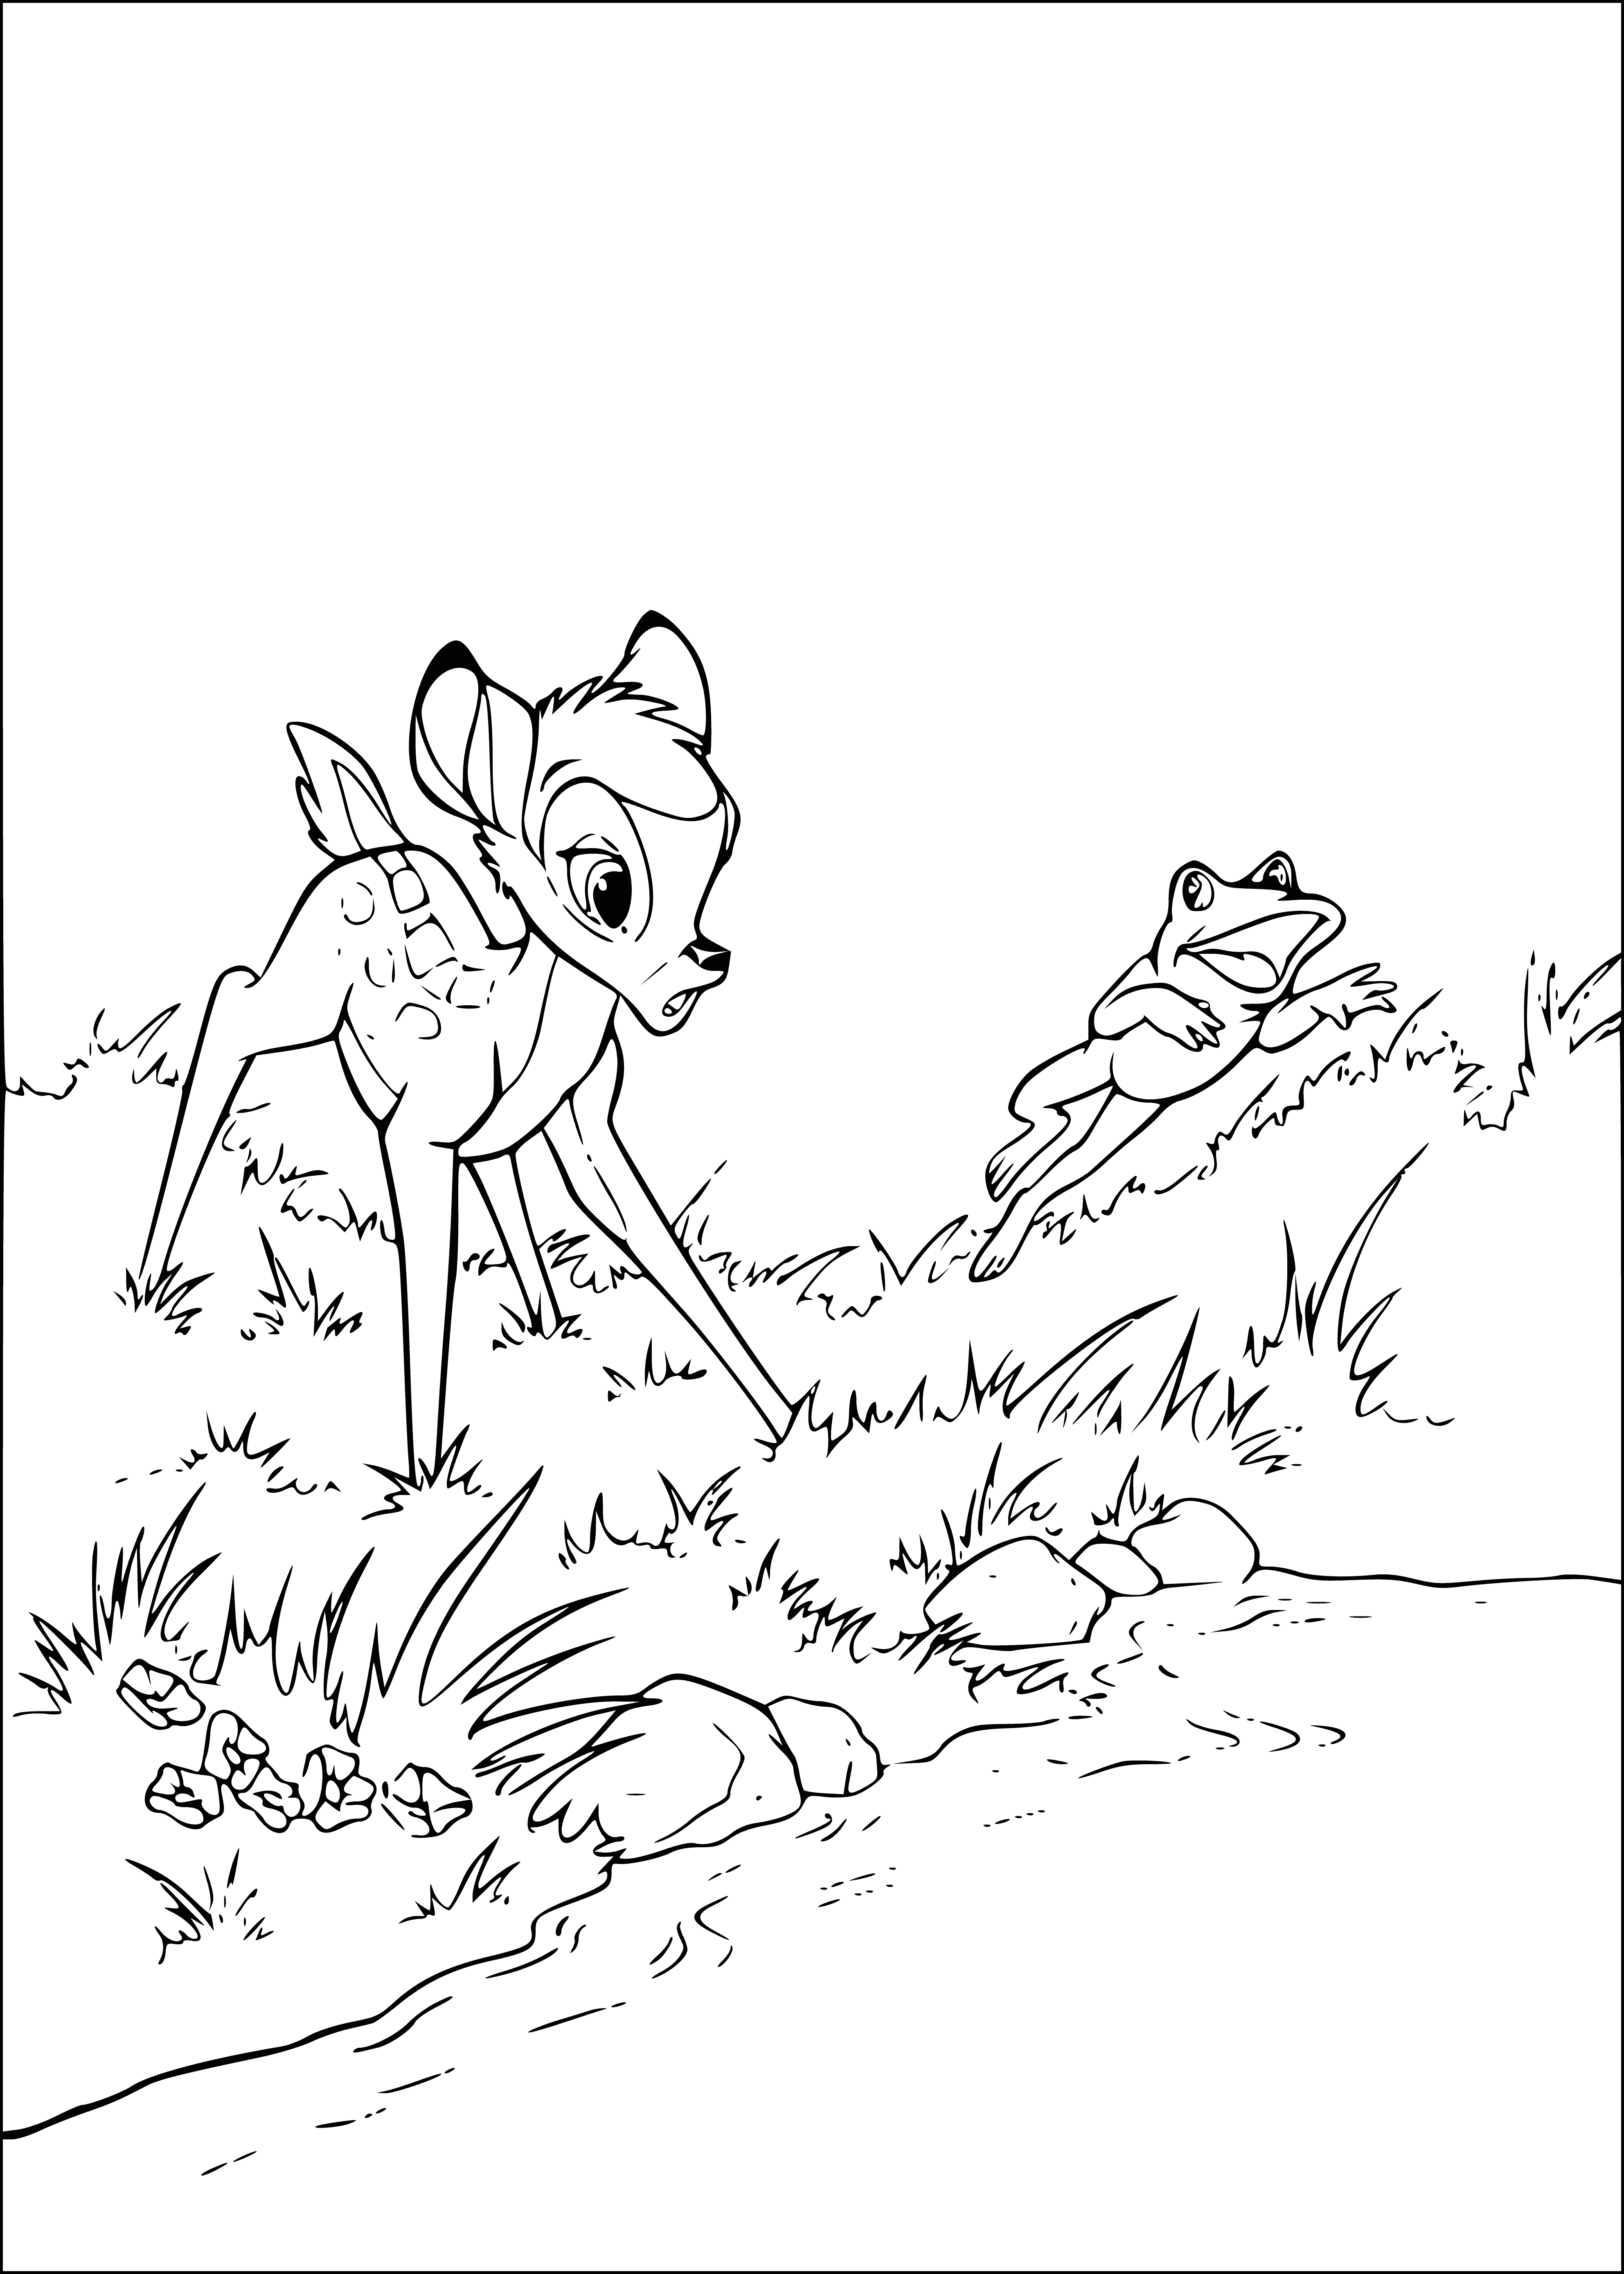 Bambi and the frog coloring page